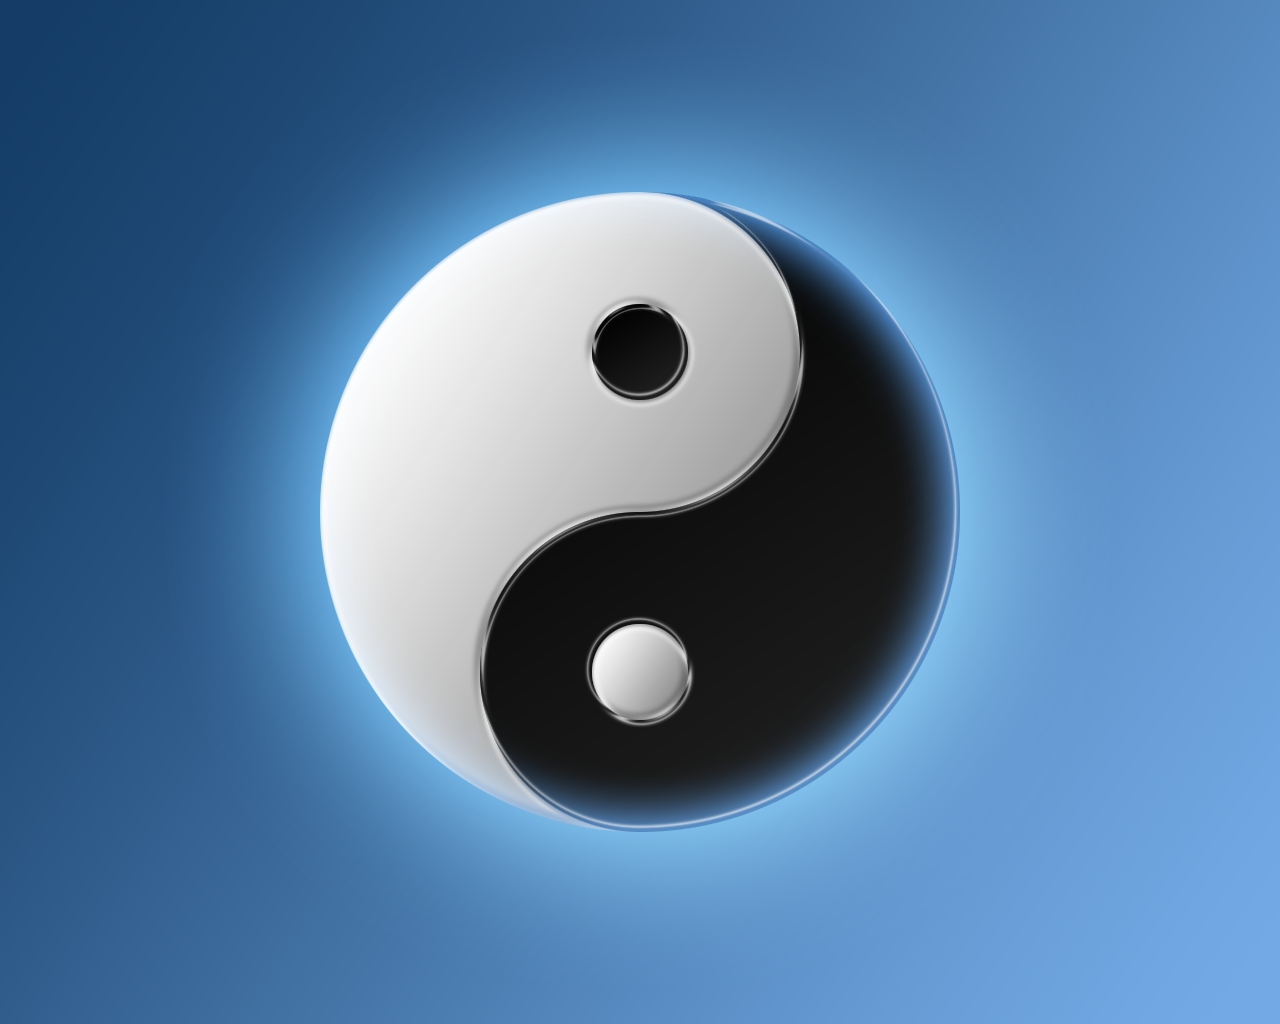 Daily Survival The Yin And Yang Of Preparedness